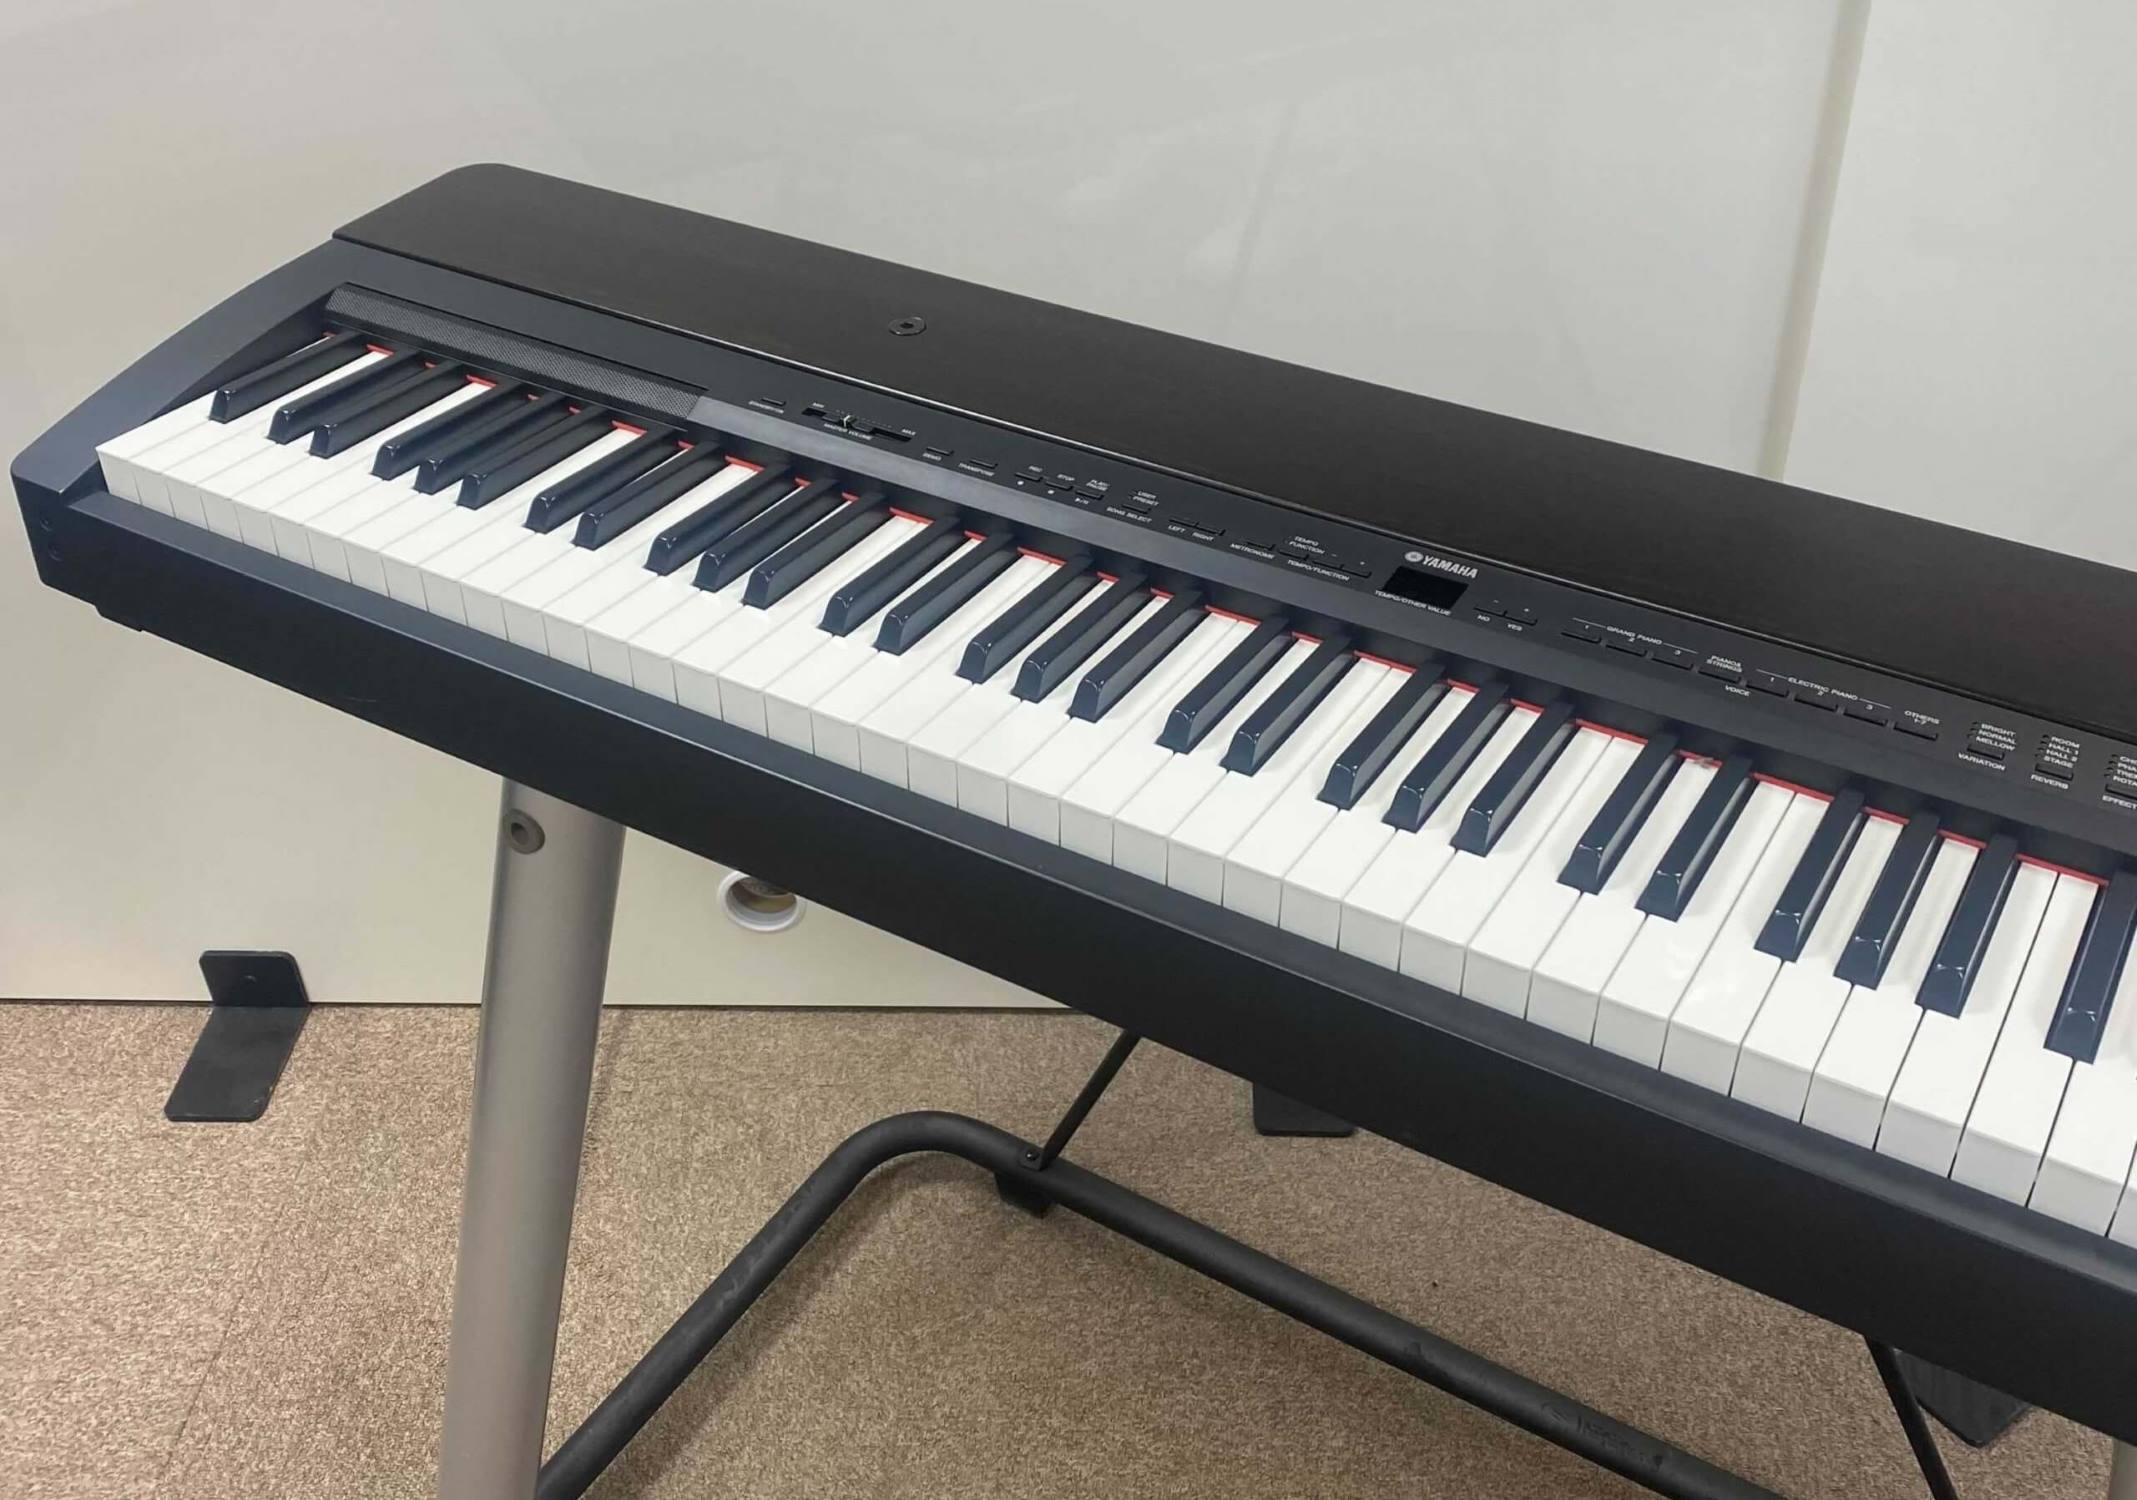 what-digital-piano-is-similar-to-the-yamaha-p140